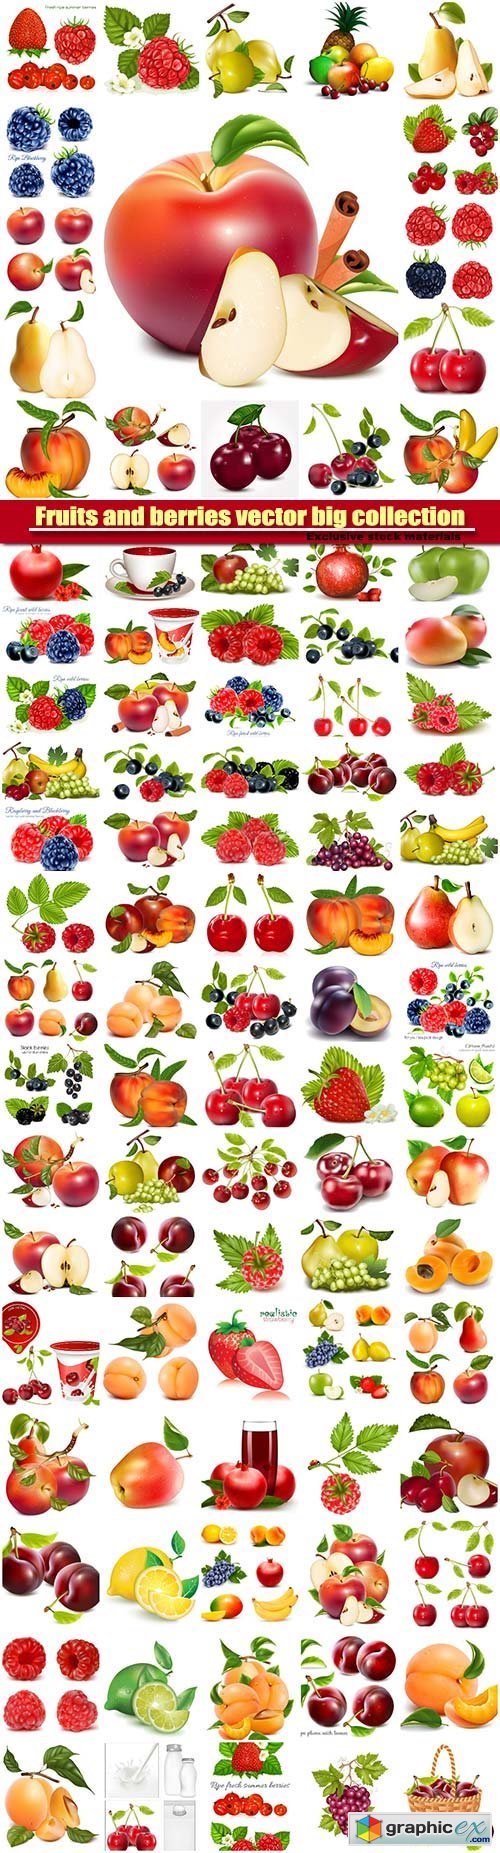 Fruits and berries vector big collection